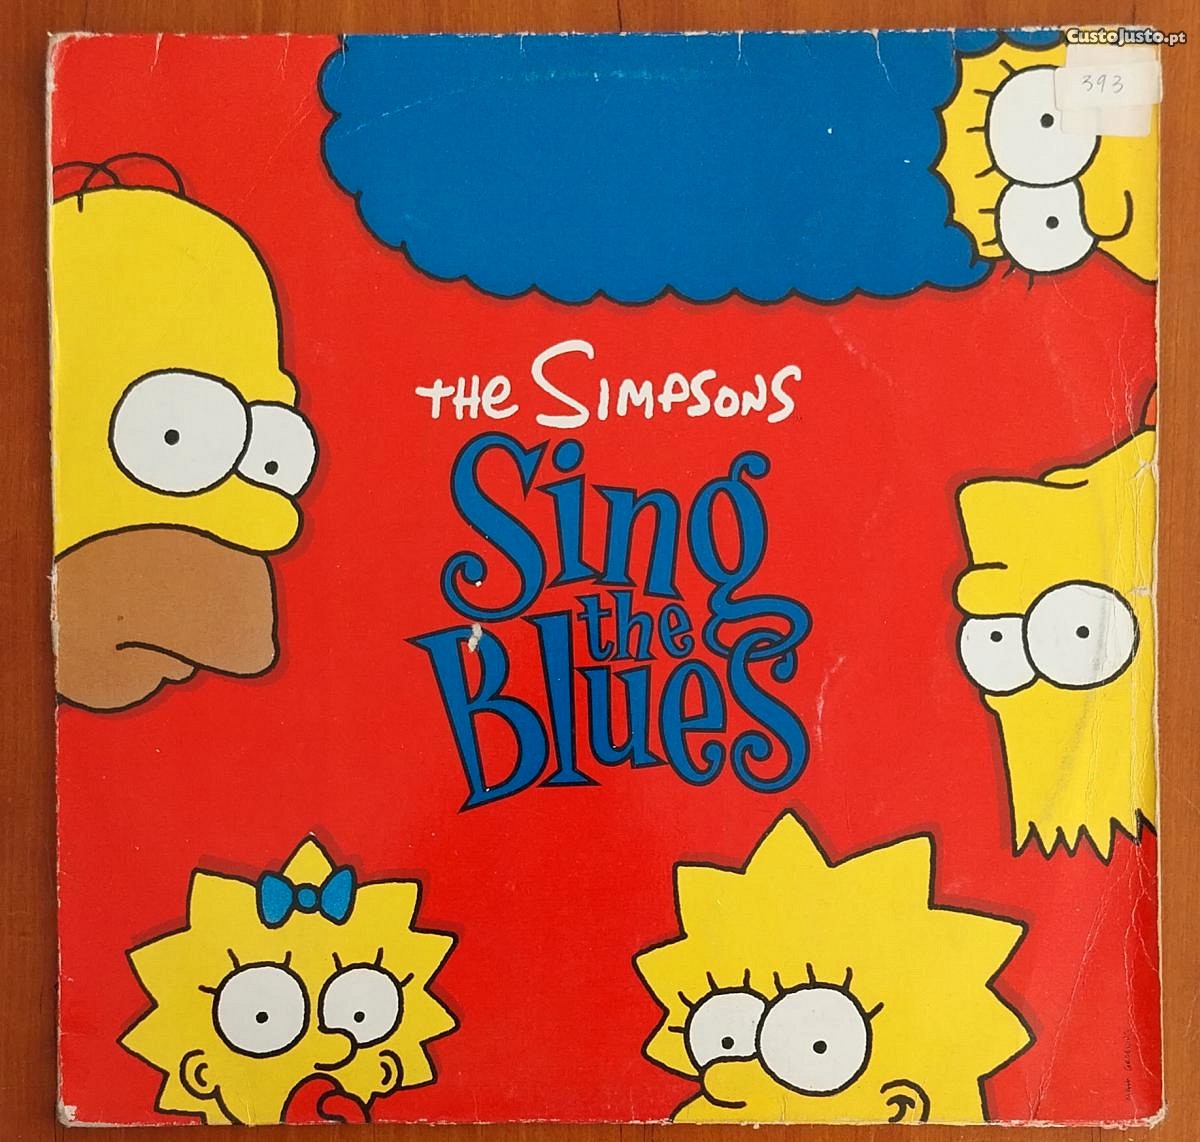 vinil: The Simpsons "Sing the blues"